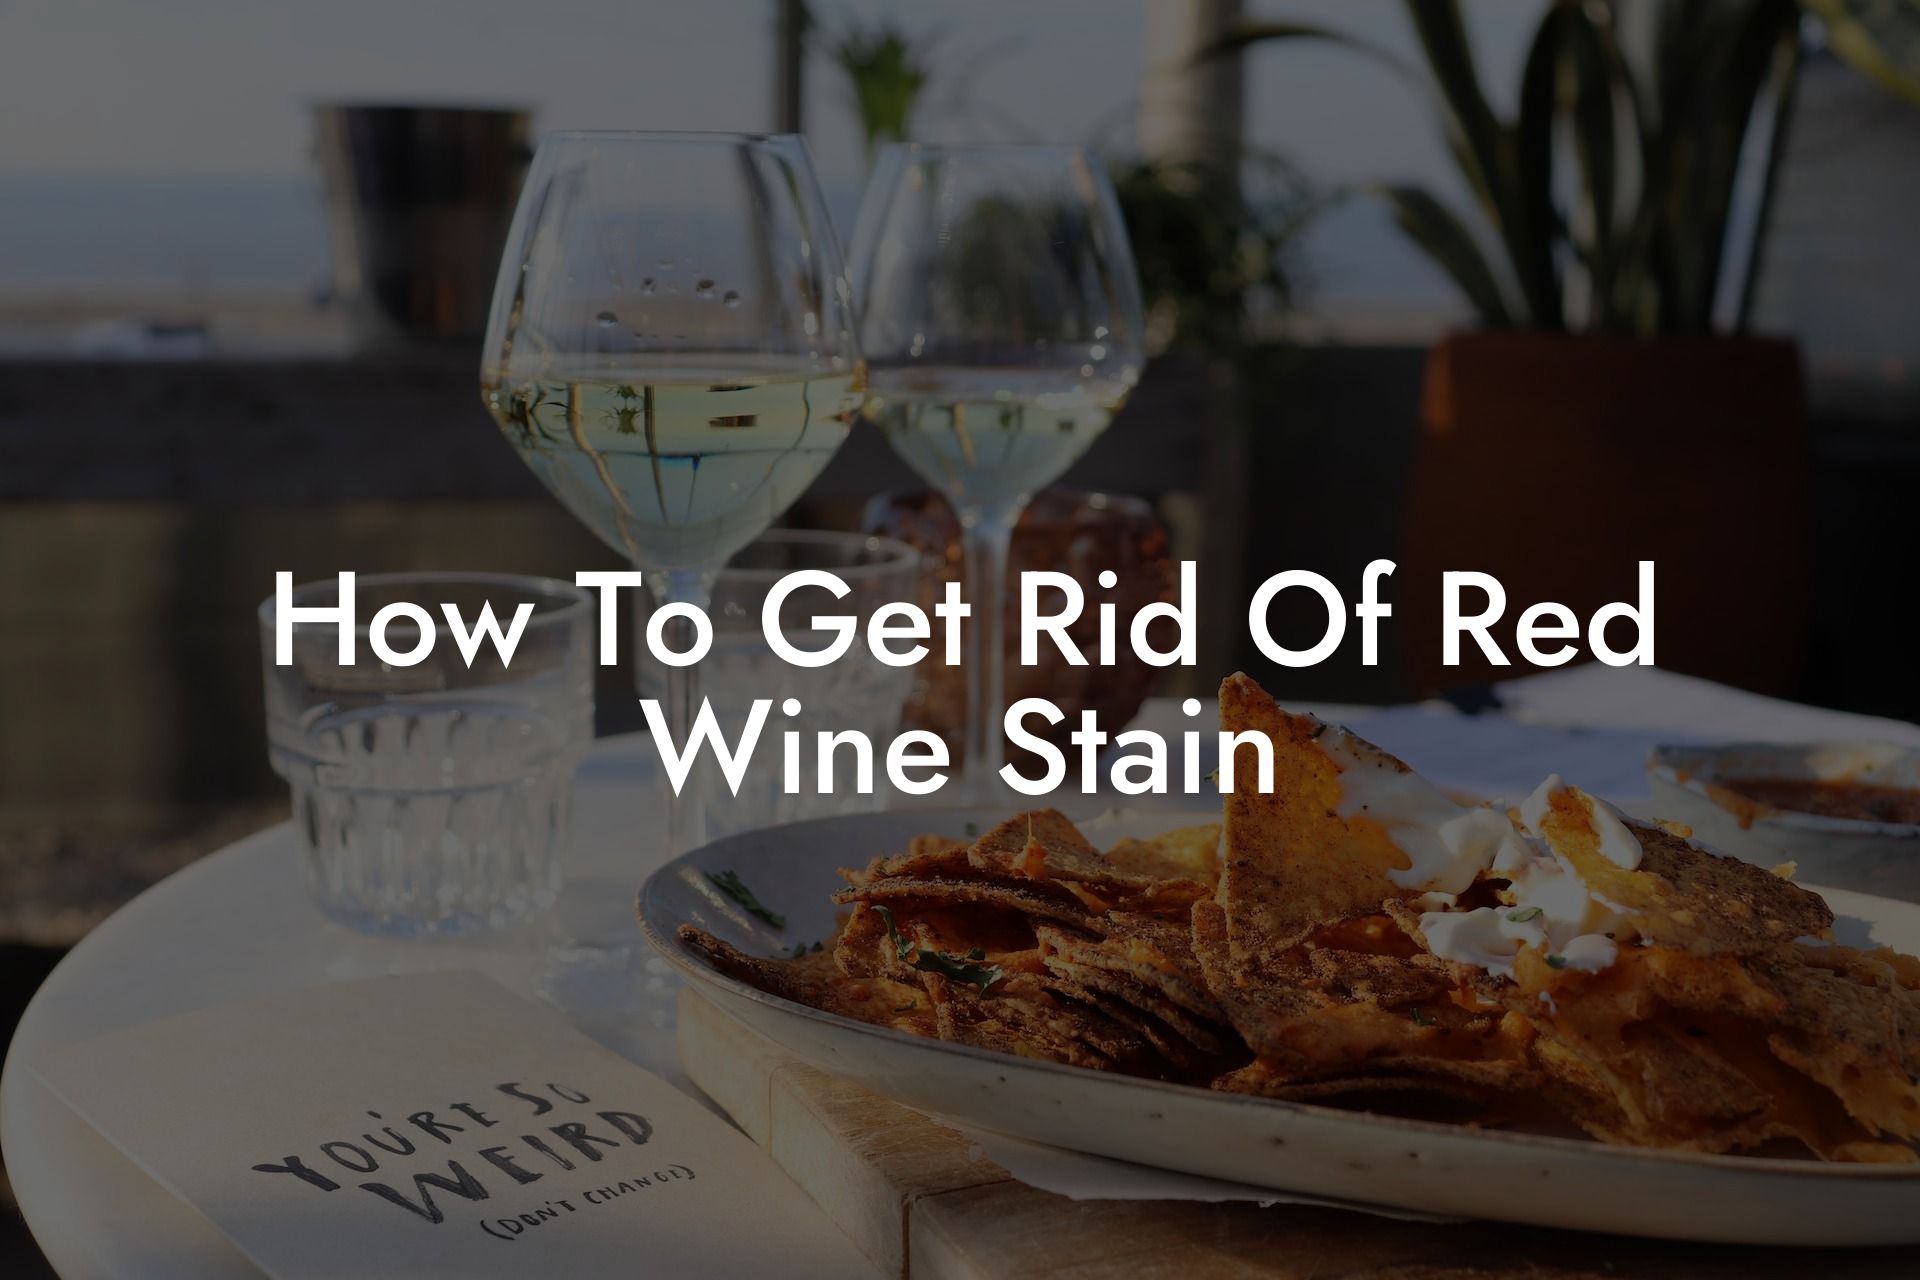 How To Get Rid Of Red Wine Stain